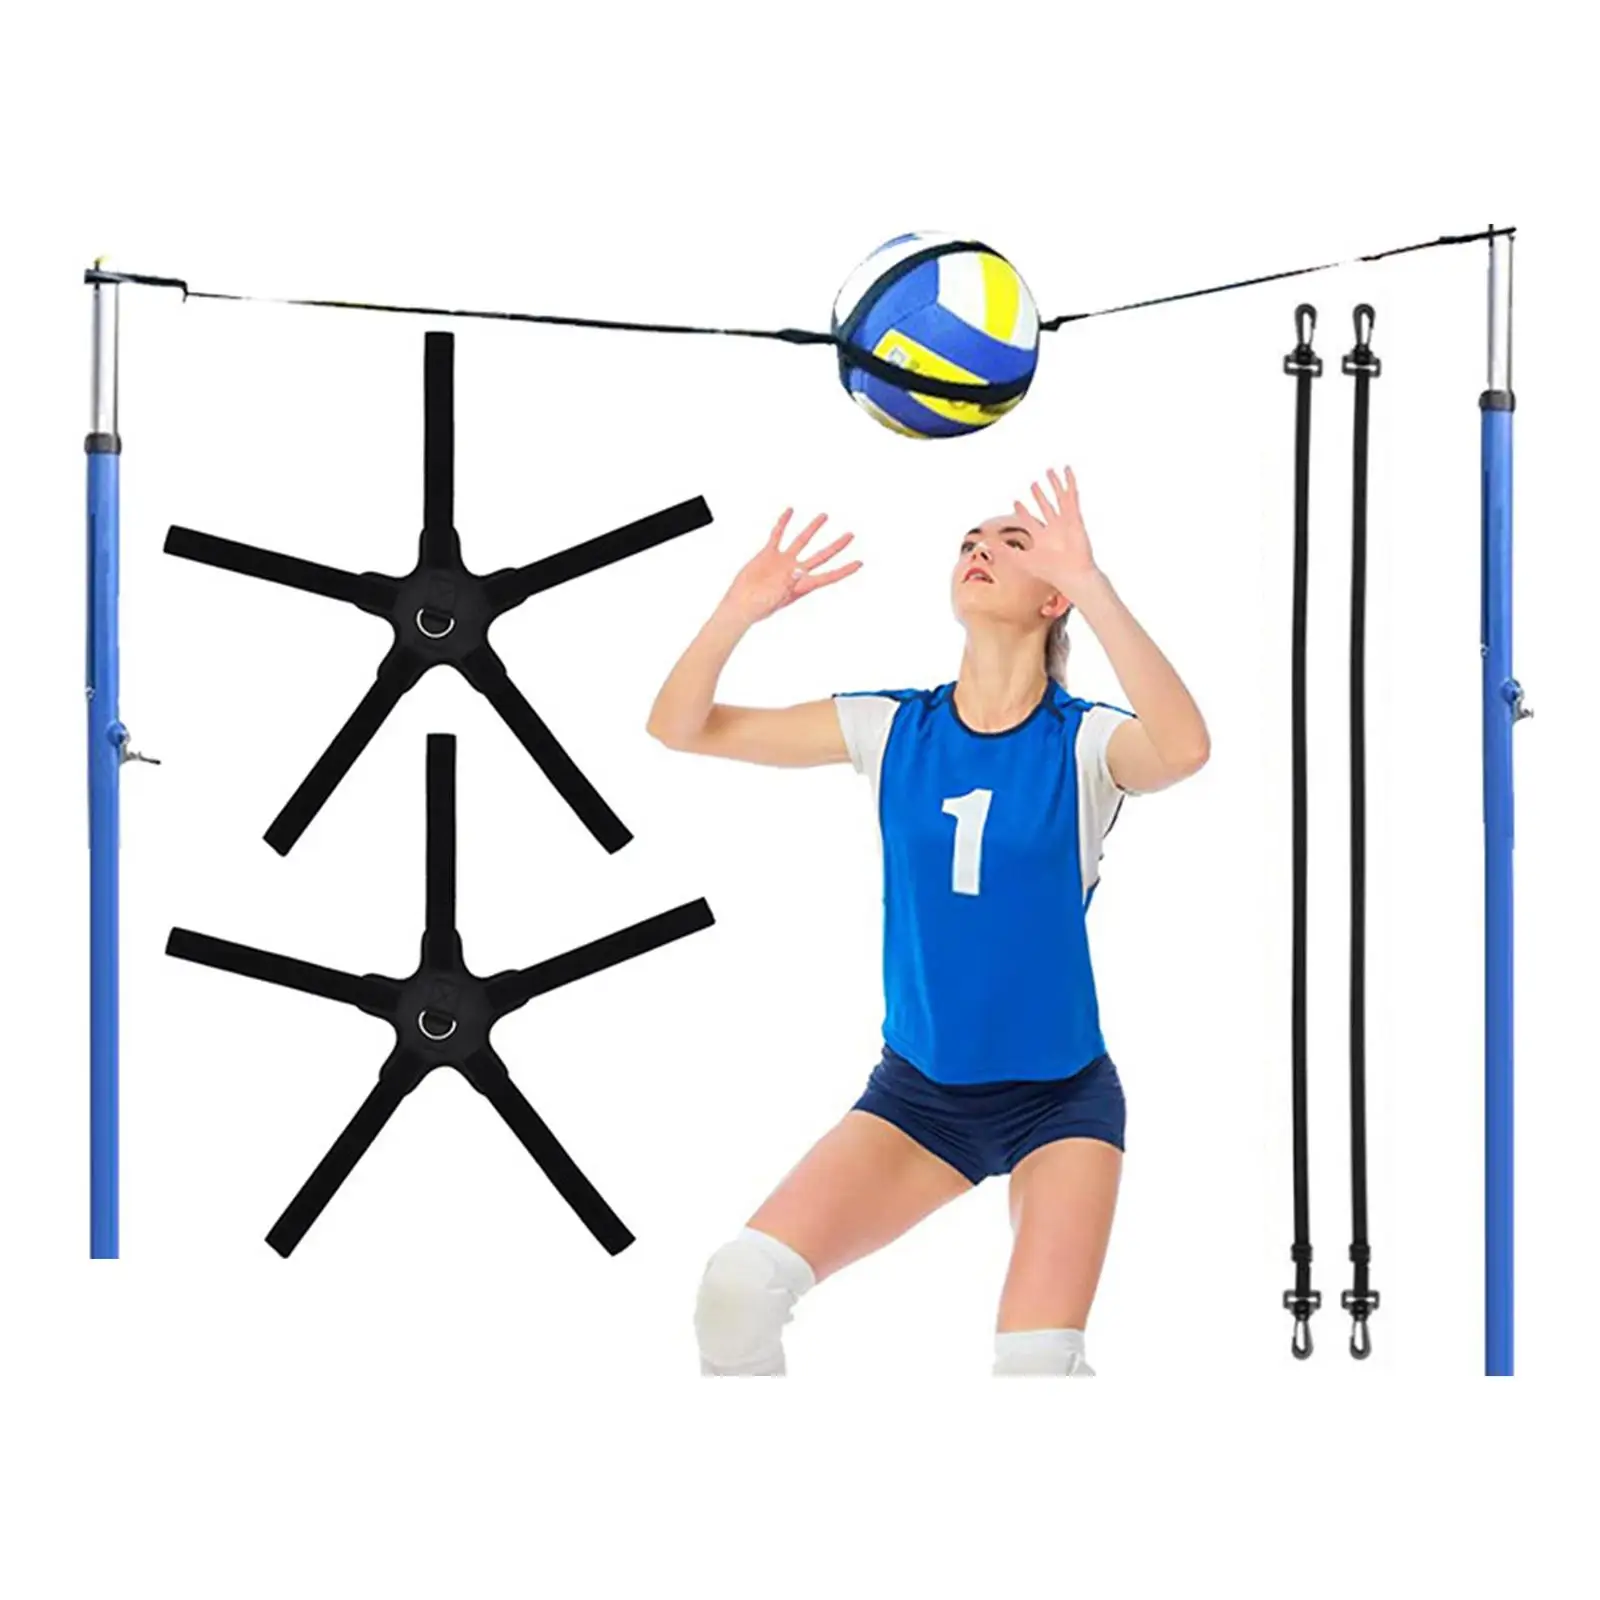 Volleyball Training Equipment Aid Solo Volleyball Trainer Elastic Belt Gifts for Beginners Setting Improves Serving Playing